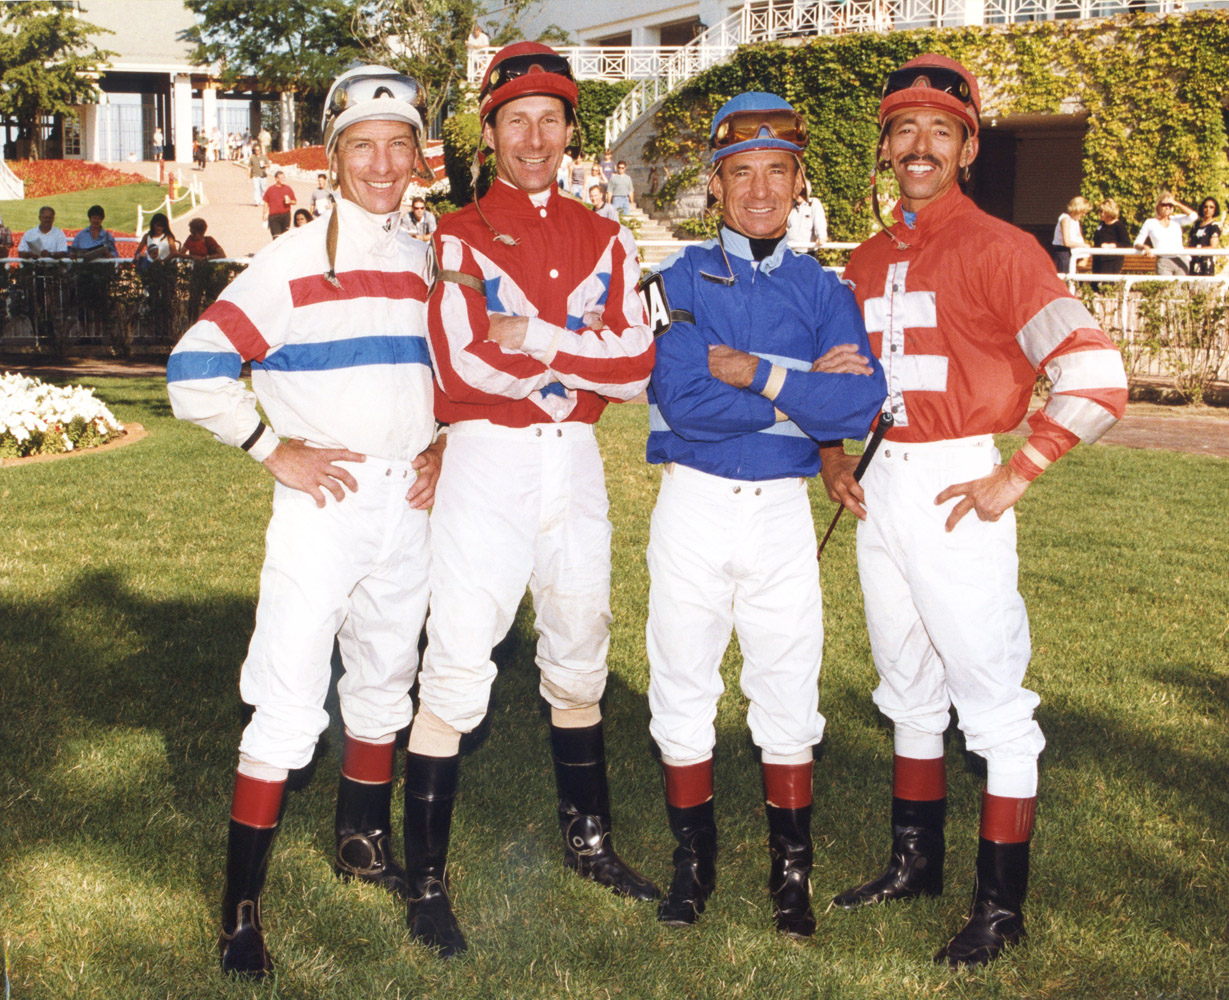 Arlington's 4,000 wins: jockeys Tim Doocy, Ray Sibille, Earlie Fires, and Mark Guidry (Benoit Photo/Museum Collection)